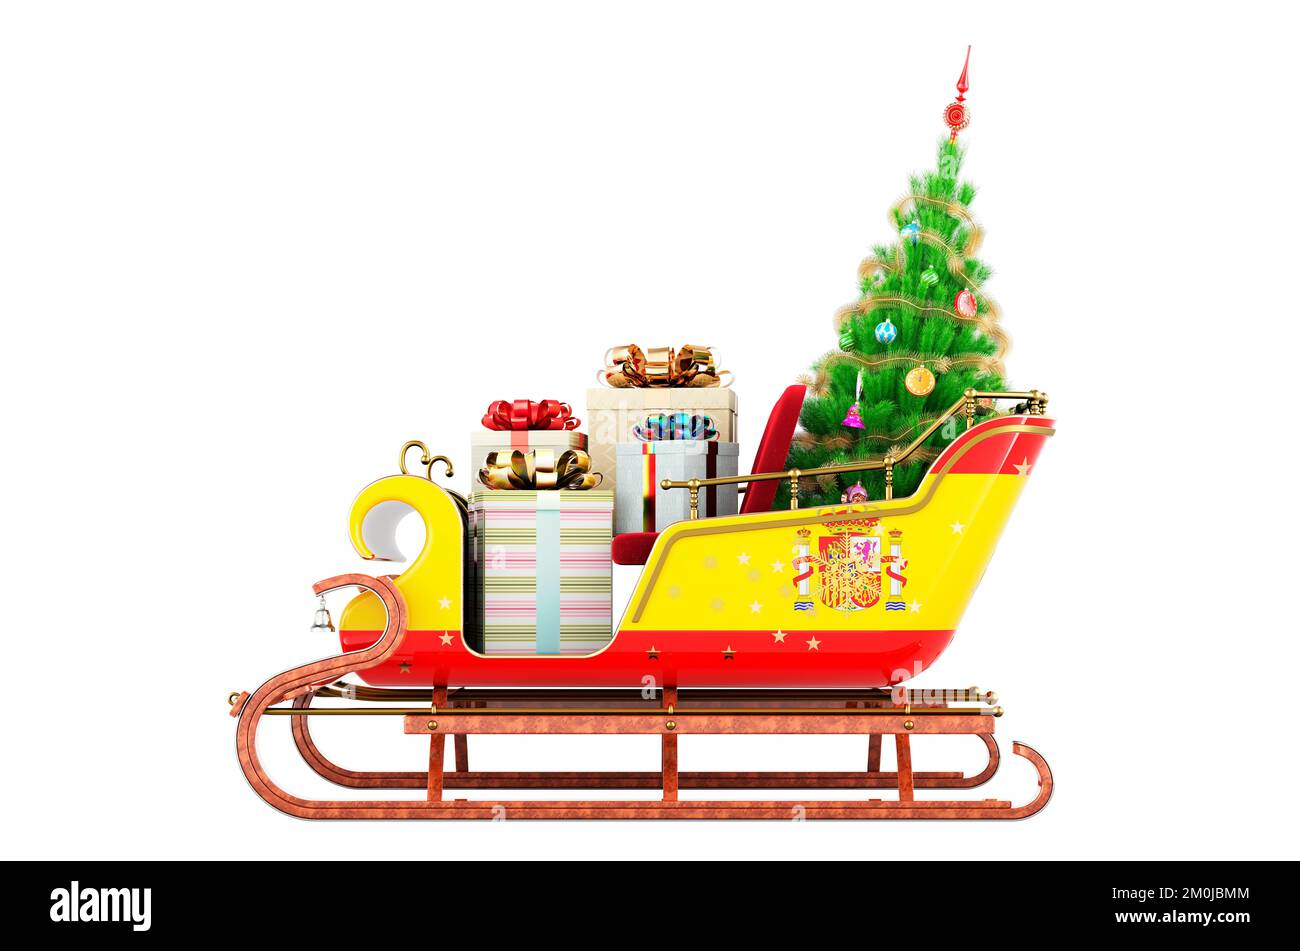 Spanish flag painted on the Christmas Santa sleigh, full of gifts and Christmas tree. 3D rendering isolated on white background Stock Photo